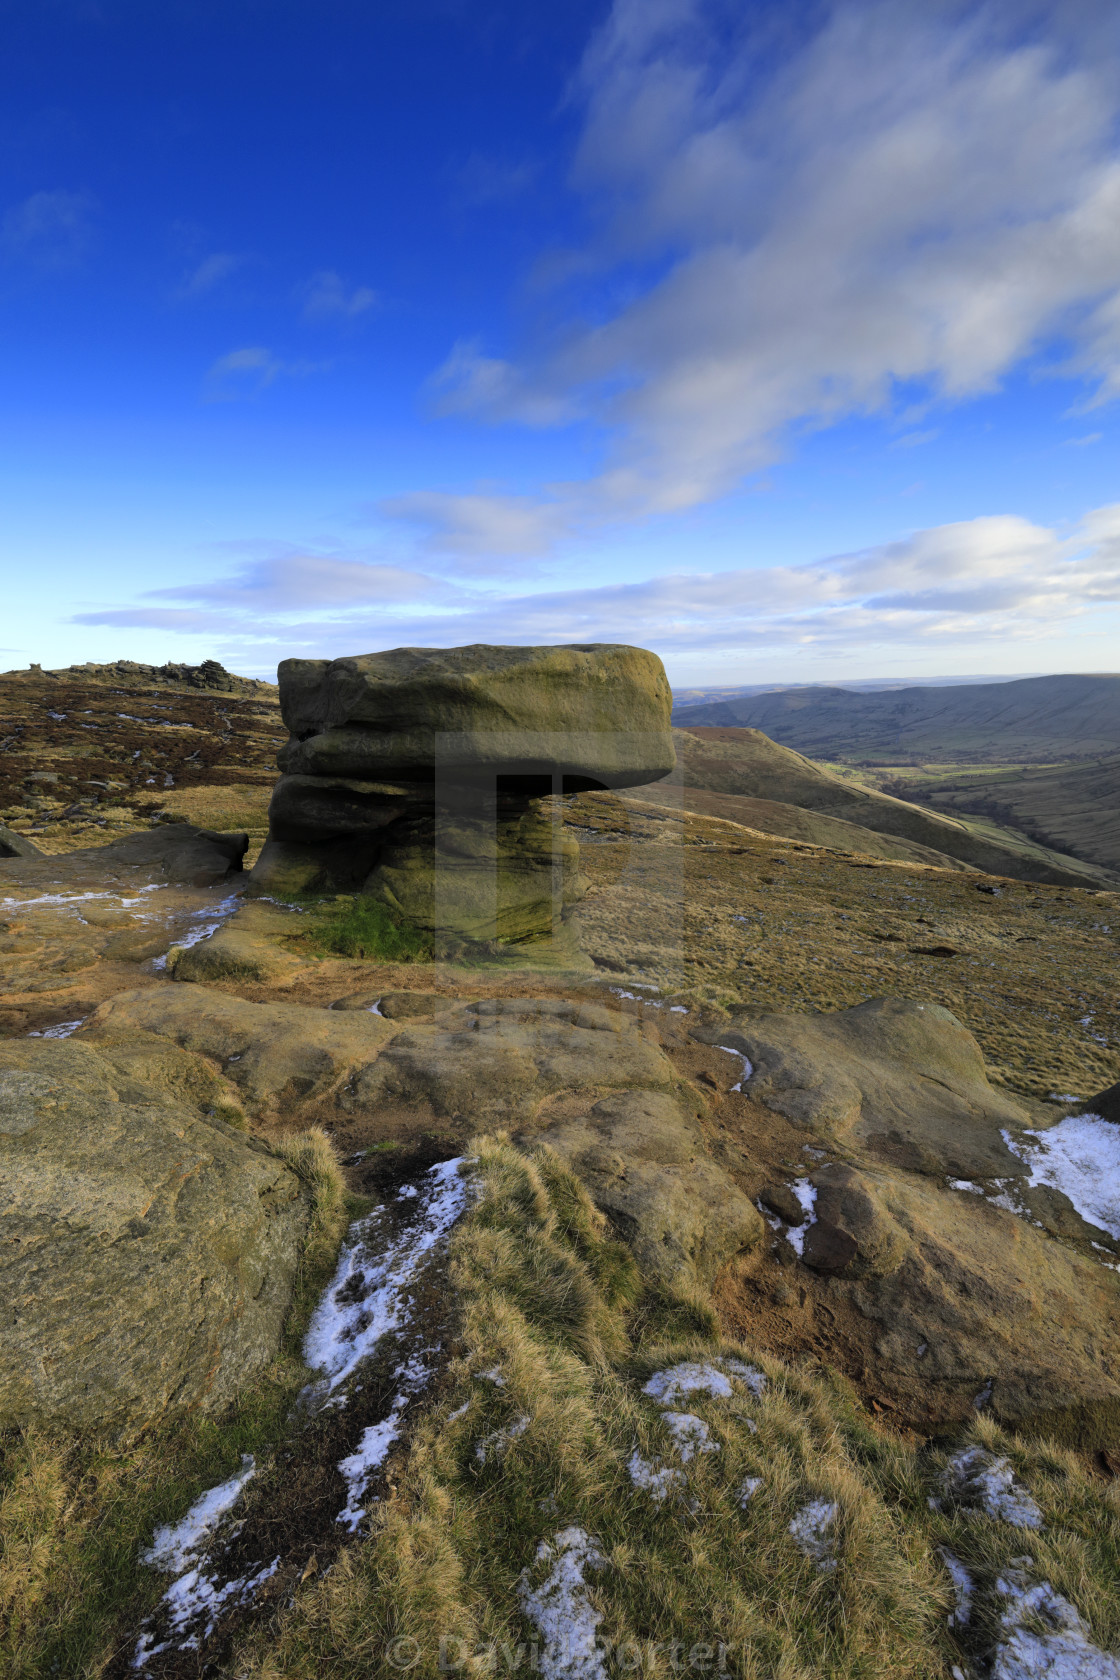 "The Noe Stool rock formation on Kinder Scout, Pennine Way, Peak District..." stock image